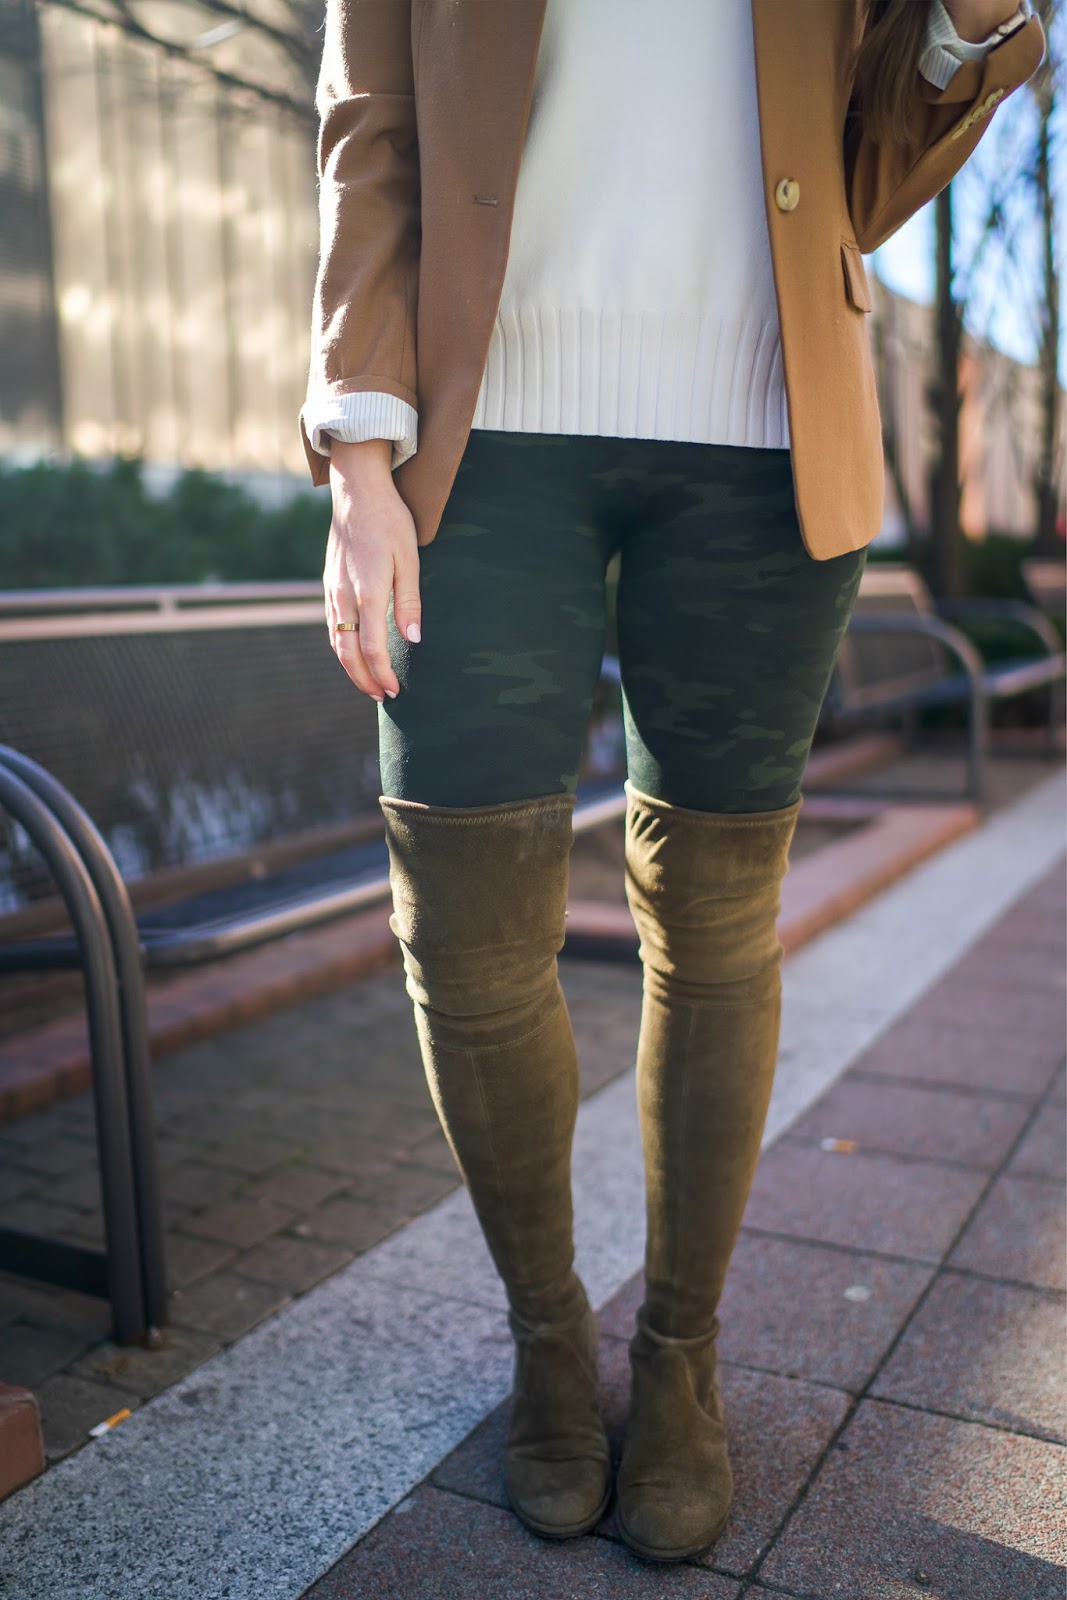 Camo Print Leggings by popular New York style blogger Covering the Bases